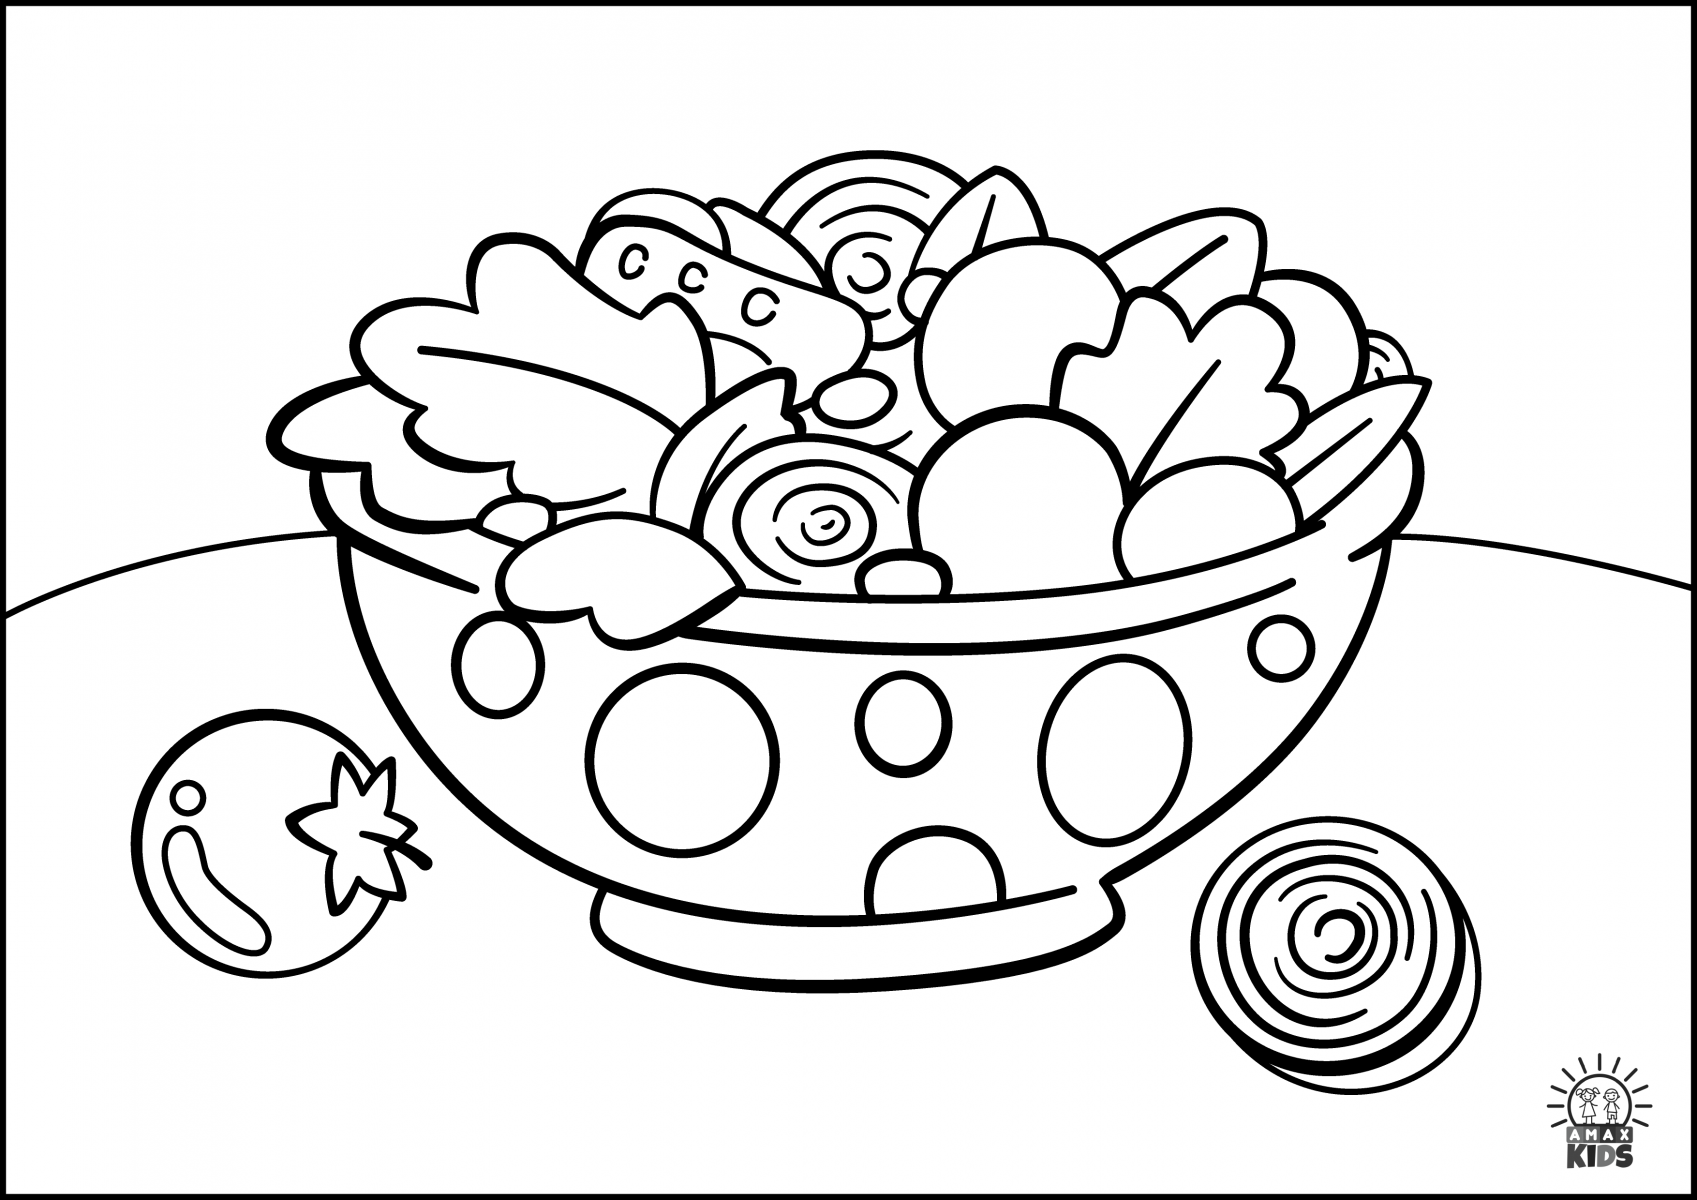 Coloring pages for kids – Food | Amax Kids